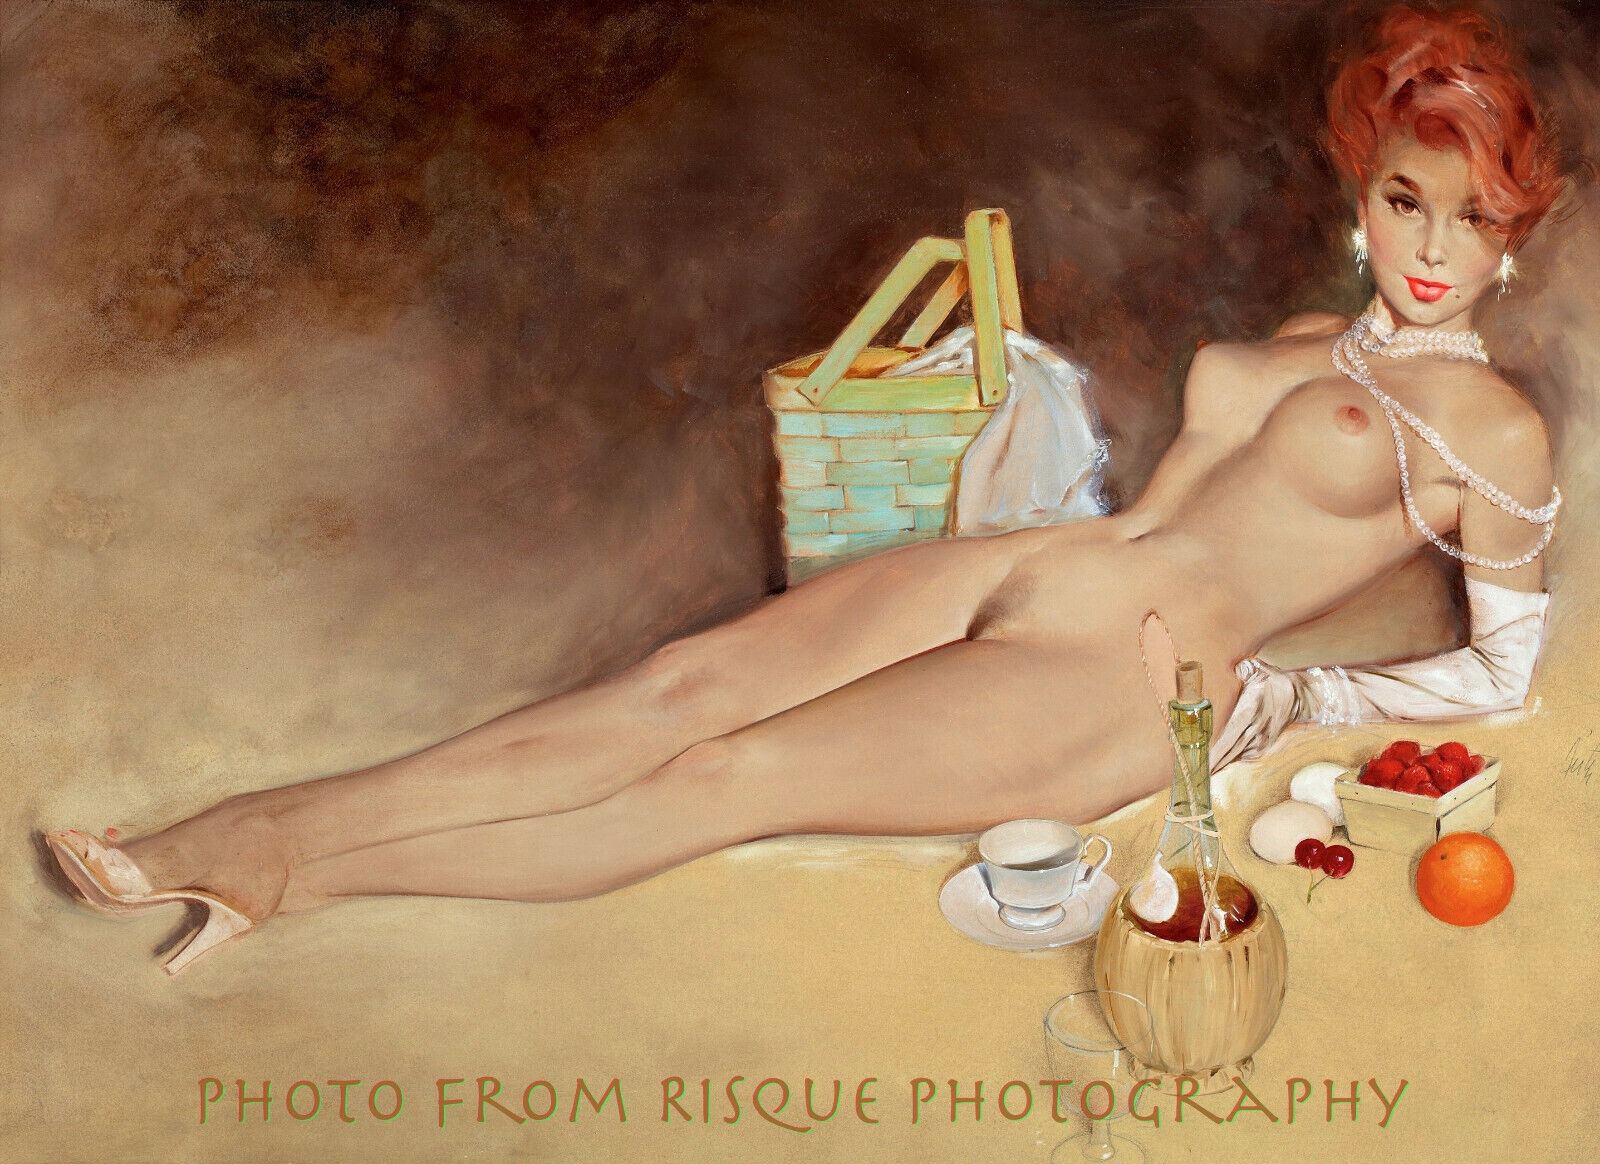 Nude Woman At A Picnic 8.5x11" Photo Prints Fritz Willis Naked Female Pinup Art Risque Photography